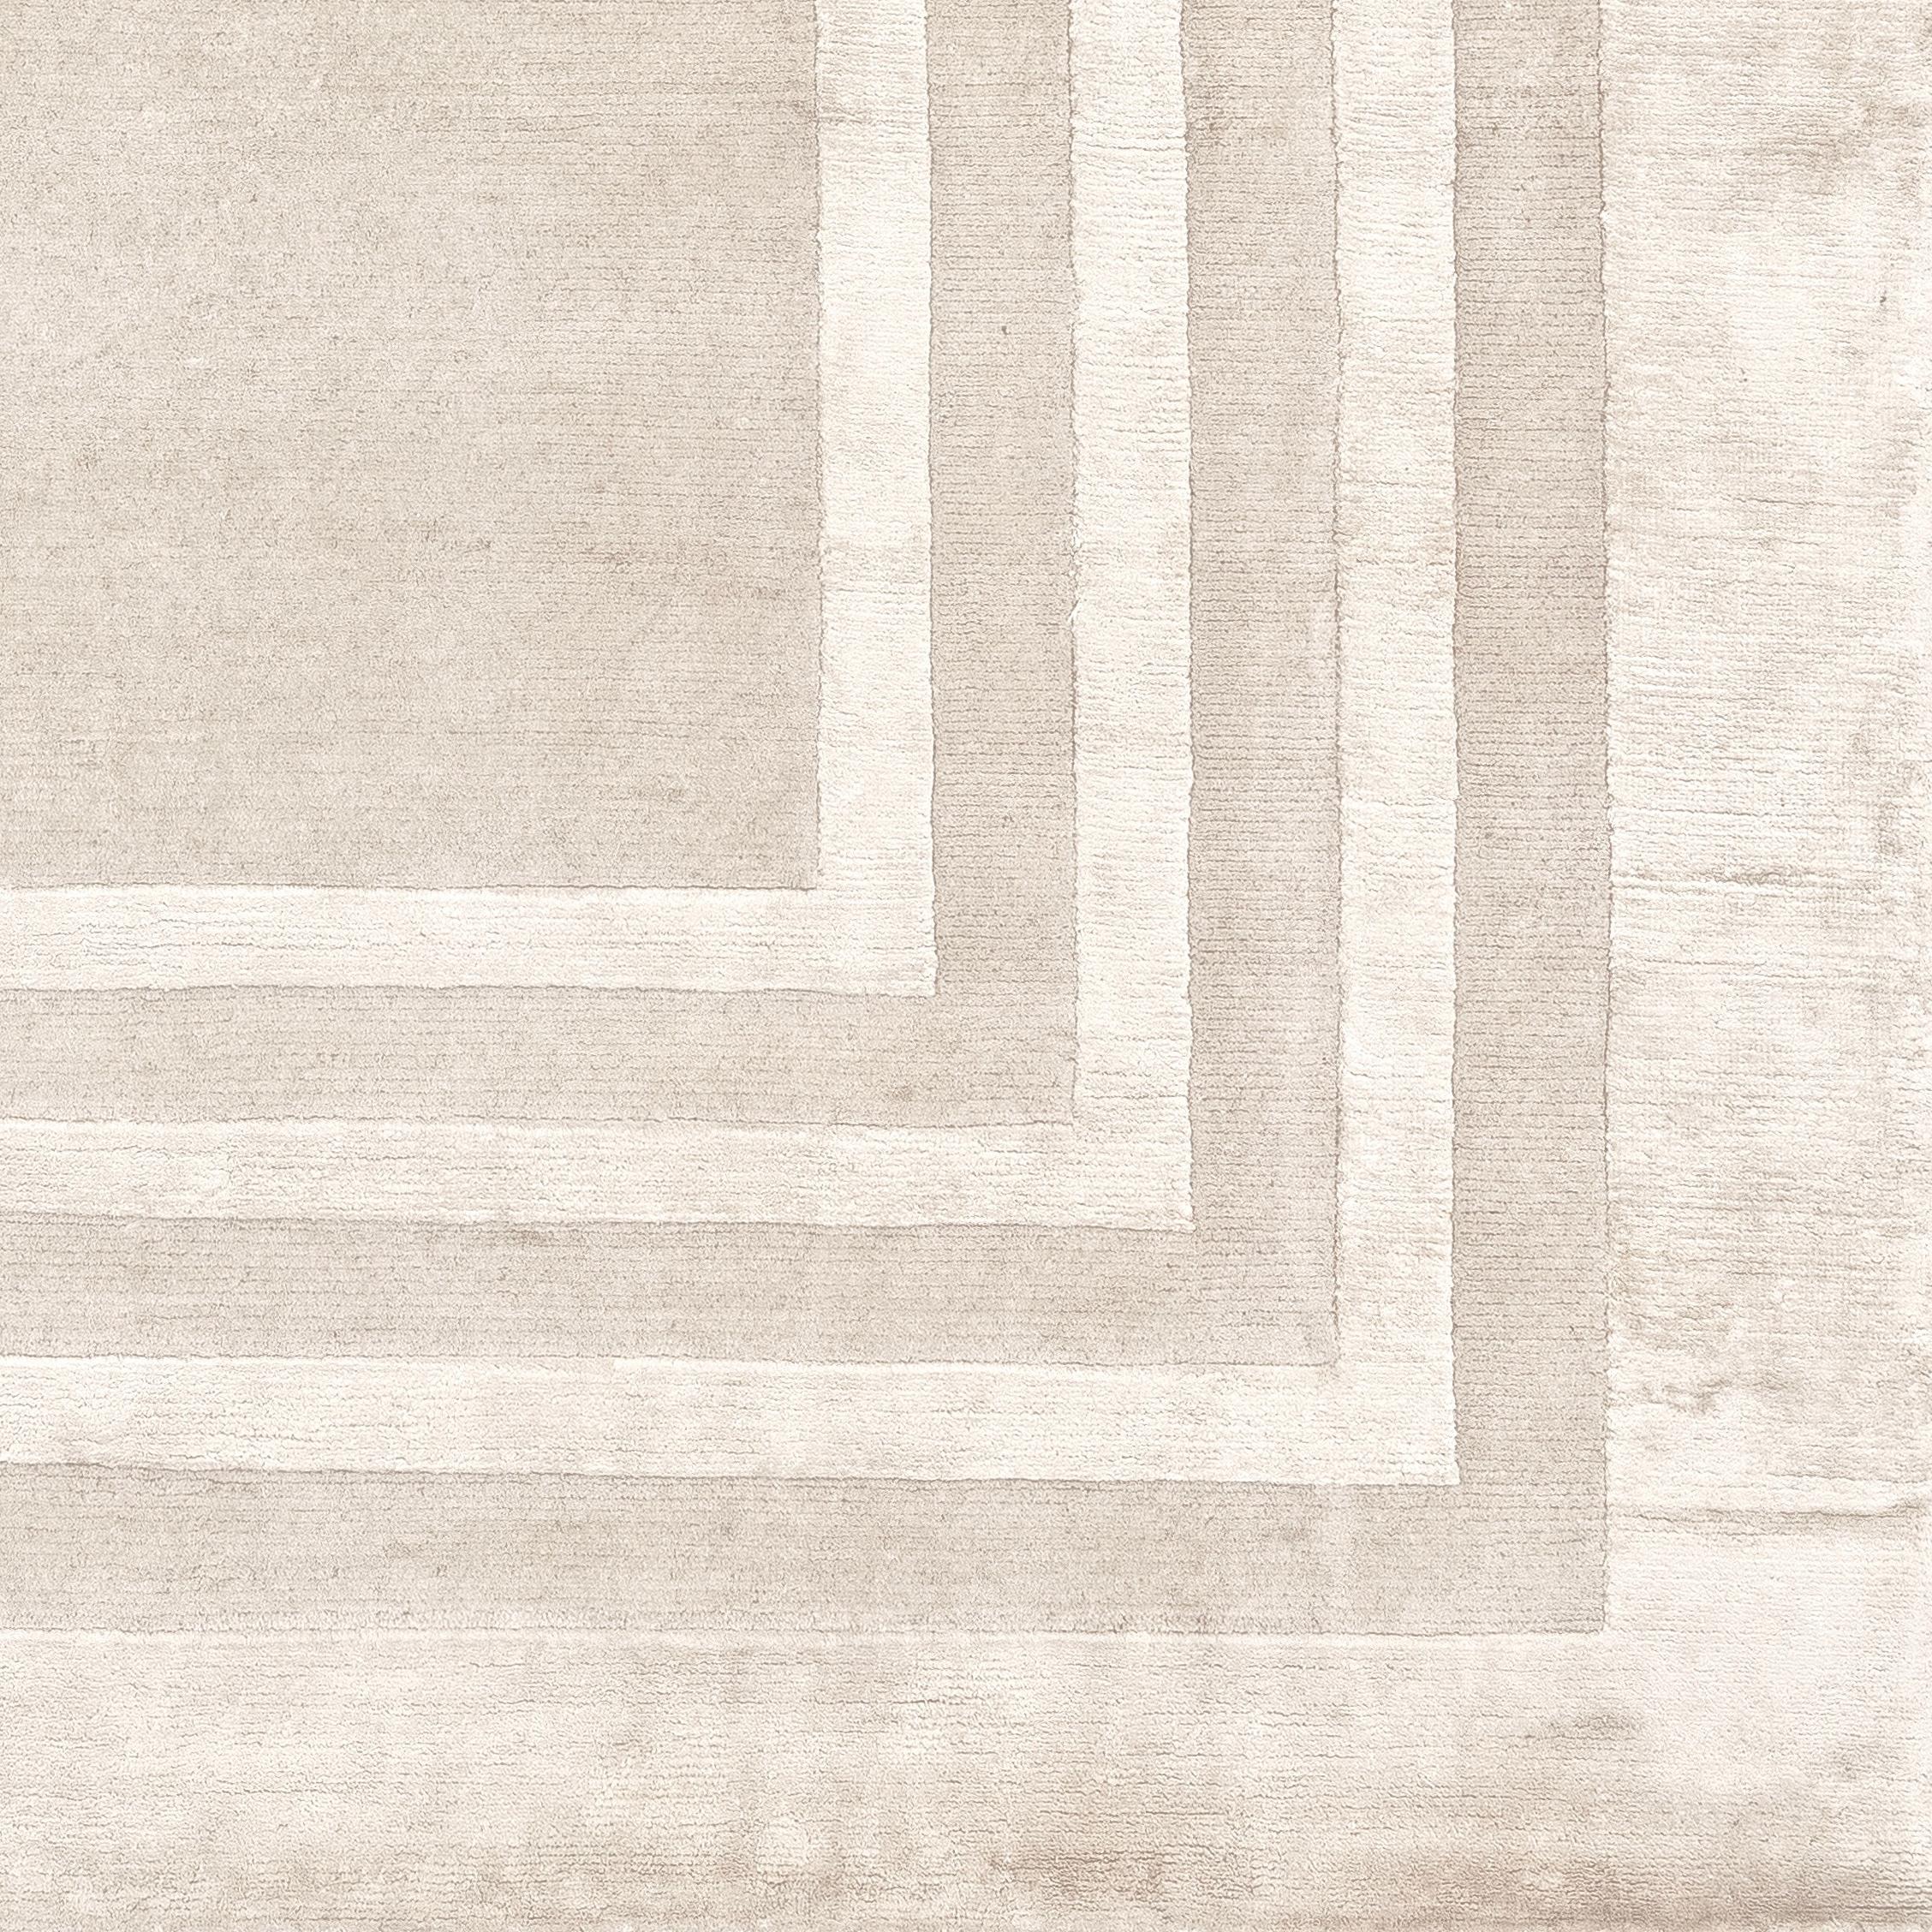 Frame III Borders stands among timeless classic suitable for lovers of minimal elegance.
This rug is hand knotted in Nepal by our artisans by using 20% silk and 80% fine Himalayan wool dyed using vegetable and mineral pigments. The base is 5 mm